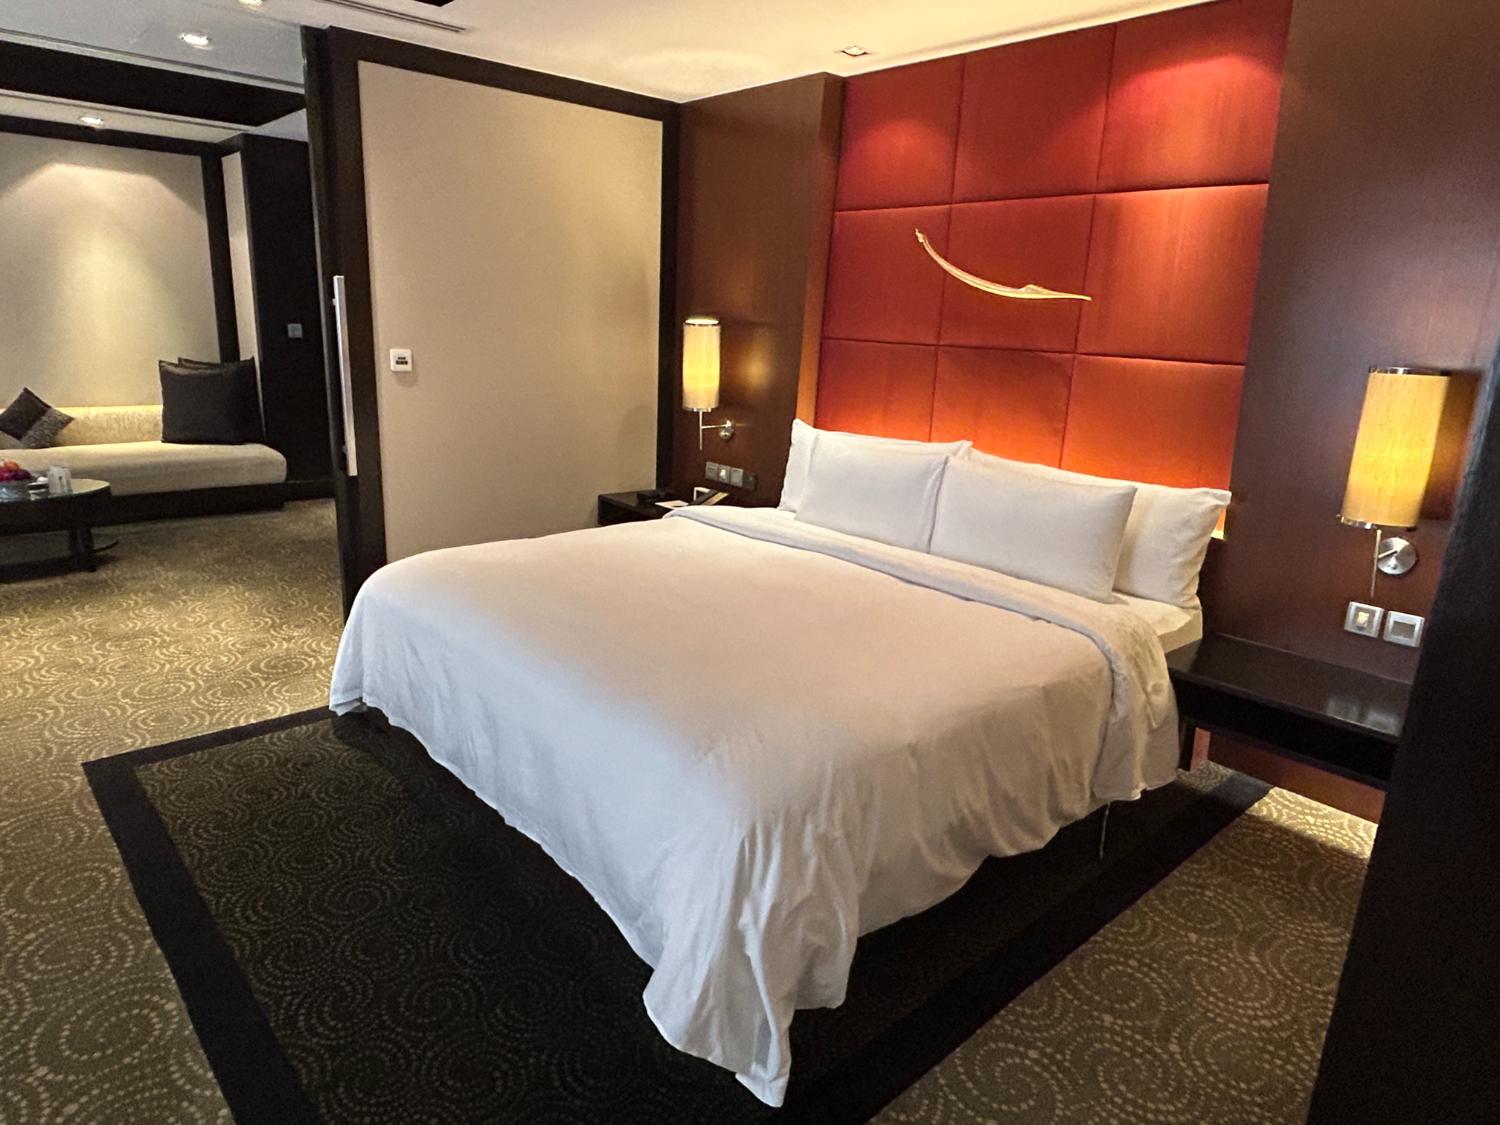 The queen size bed of Banyan Tree Hotel Bangkok